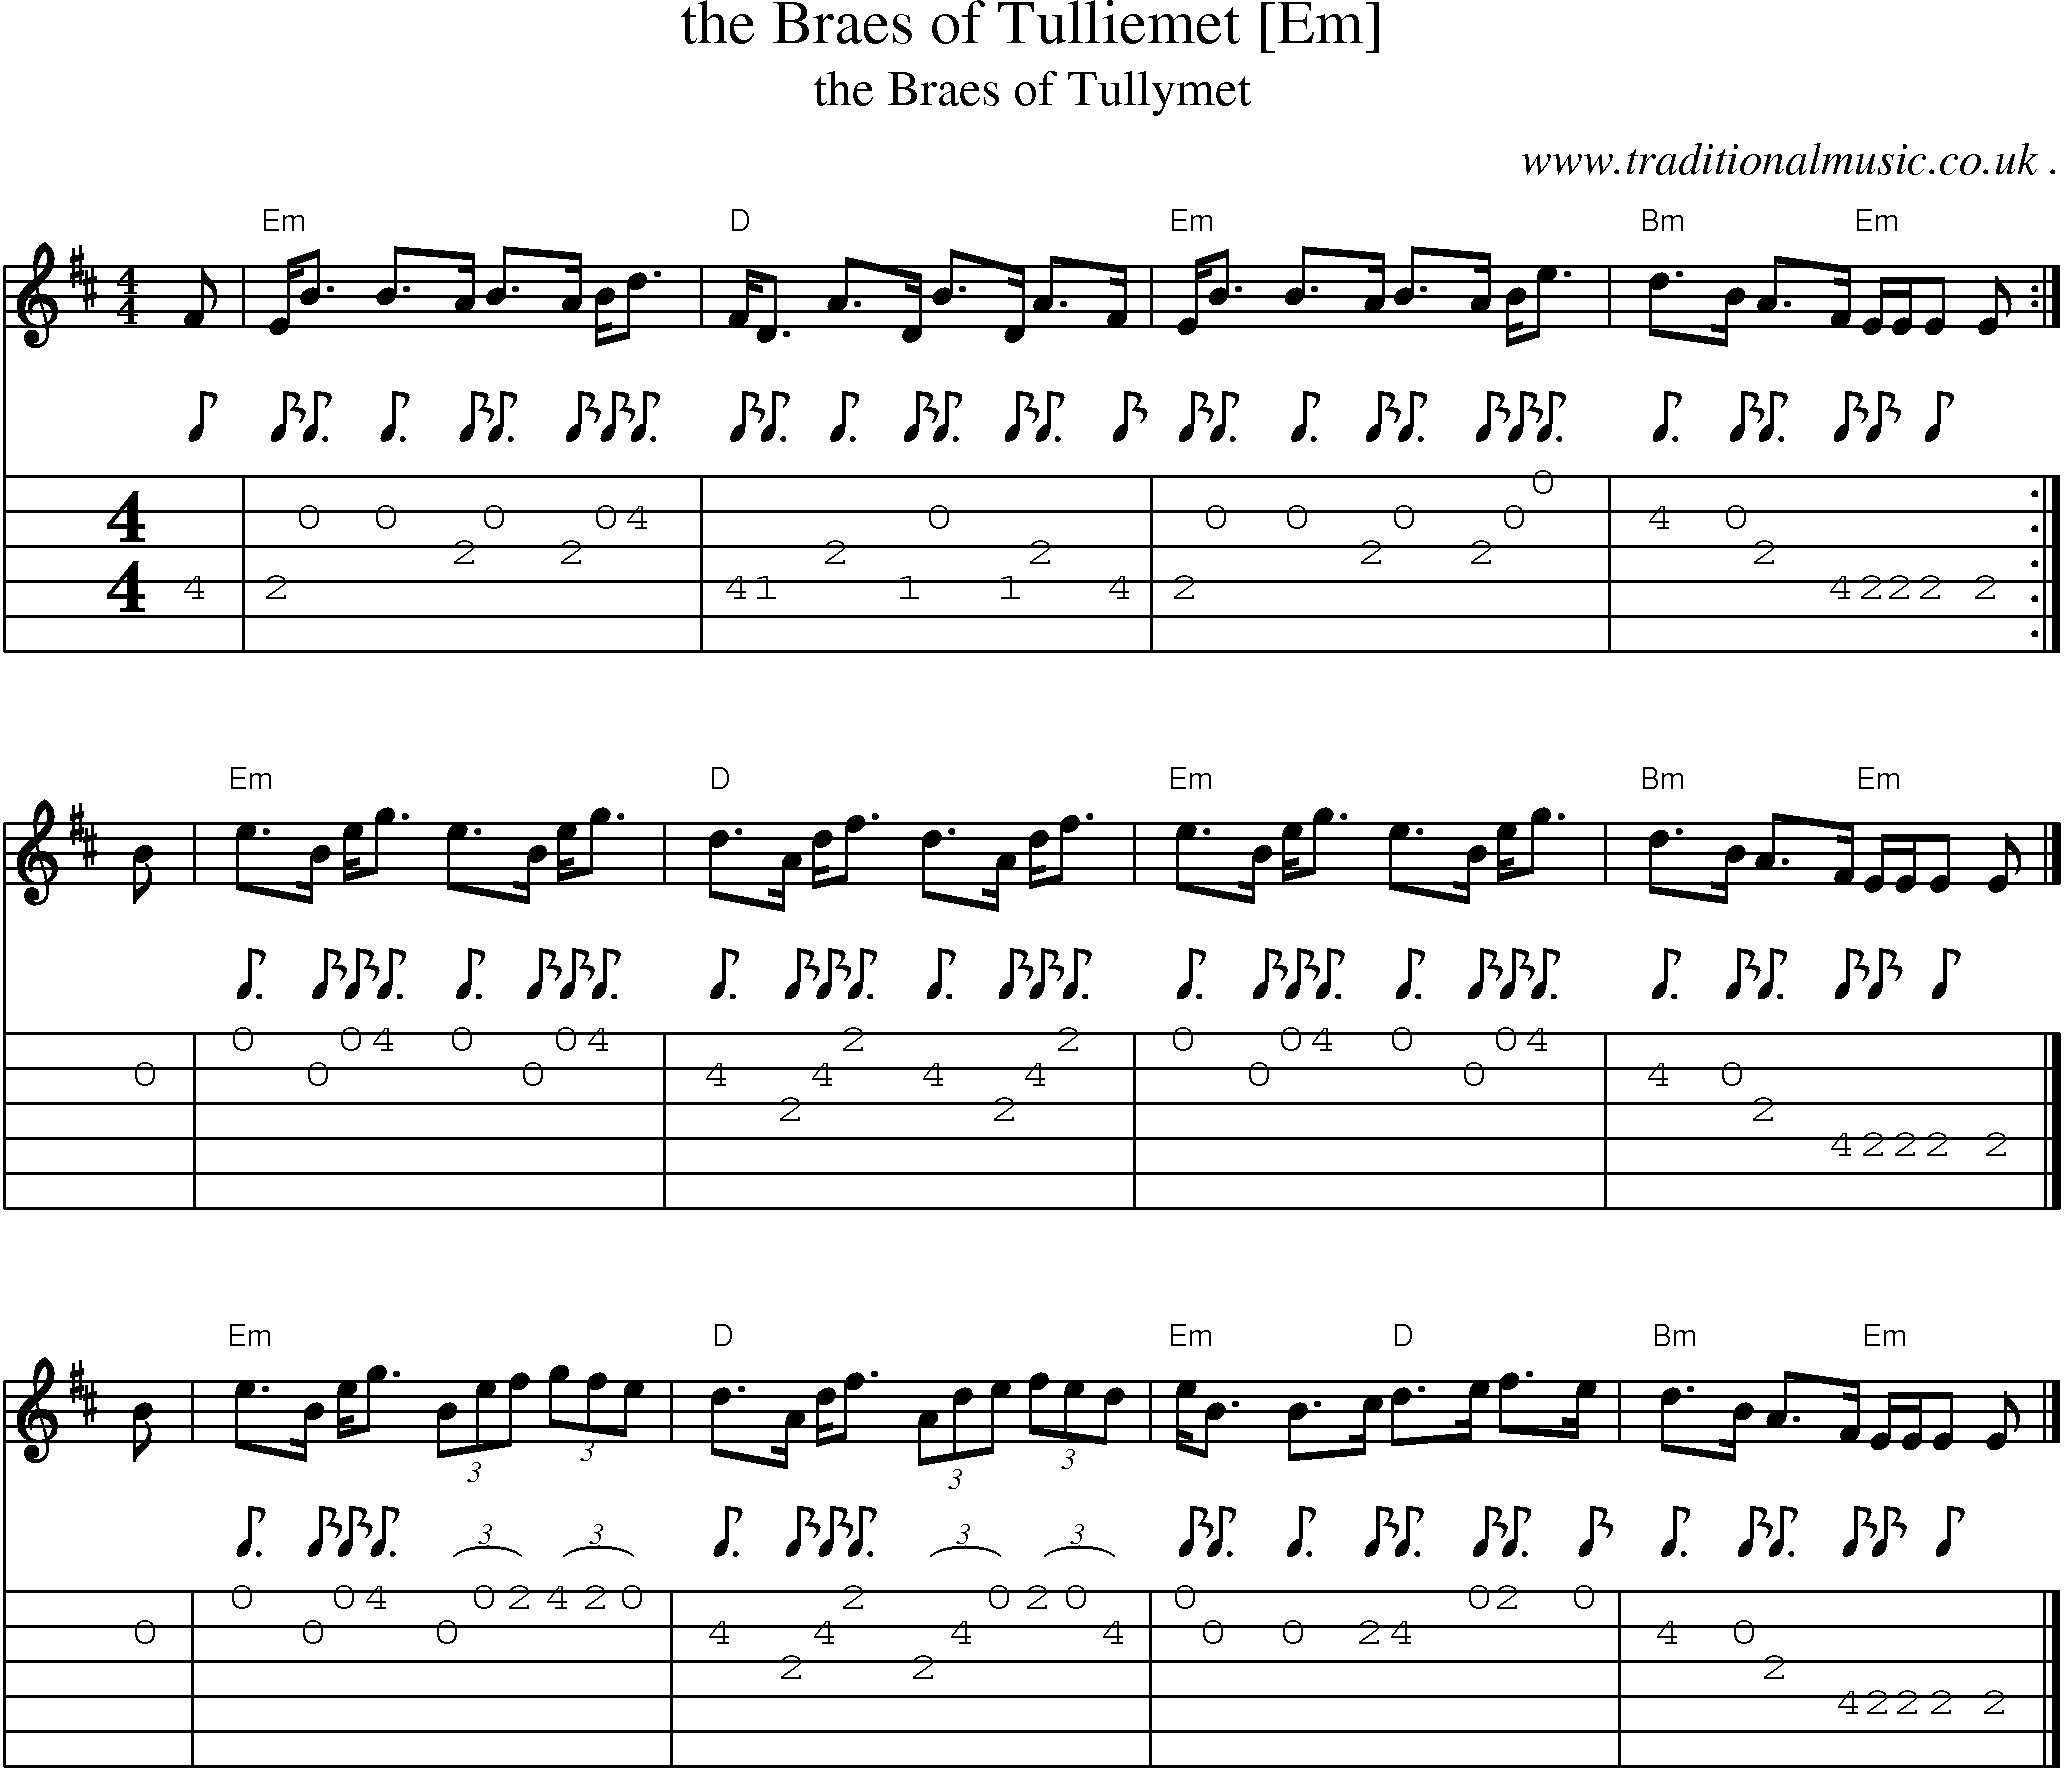 Sheet-music  score, Chords and Guitar Tabs for The Braes Of Tulliemet [em]